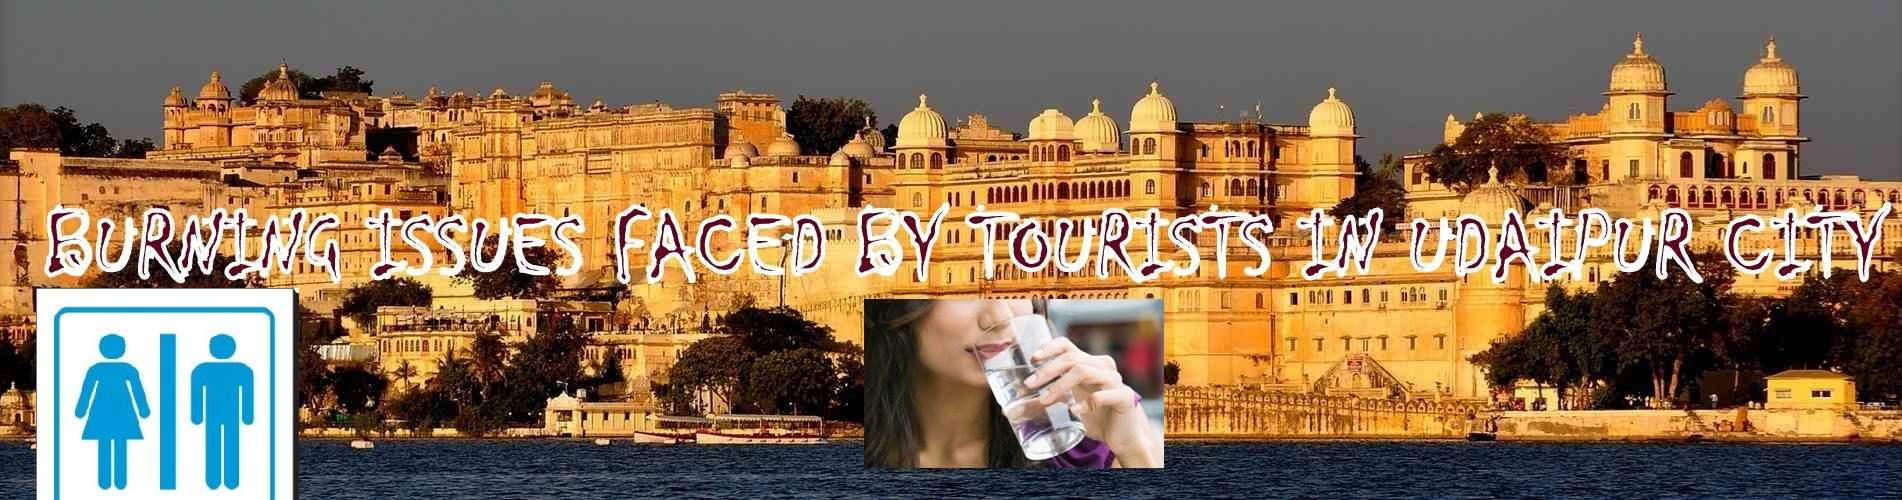 Thirsty at the well? Issues faced by tourists